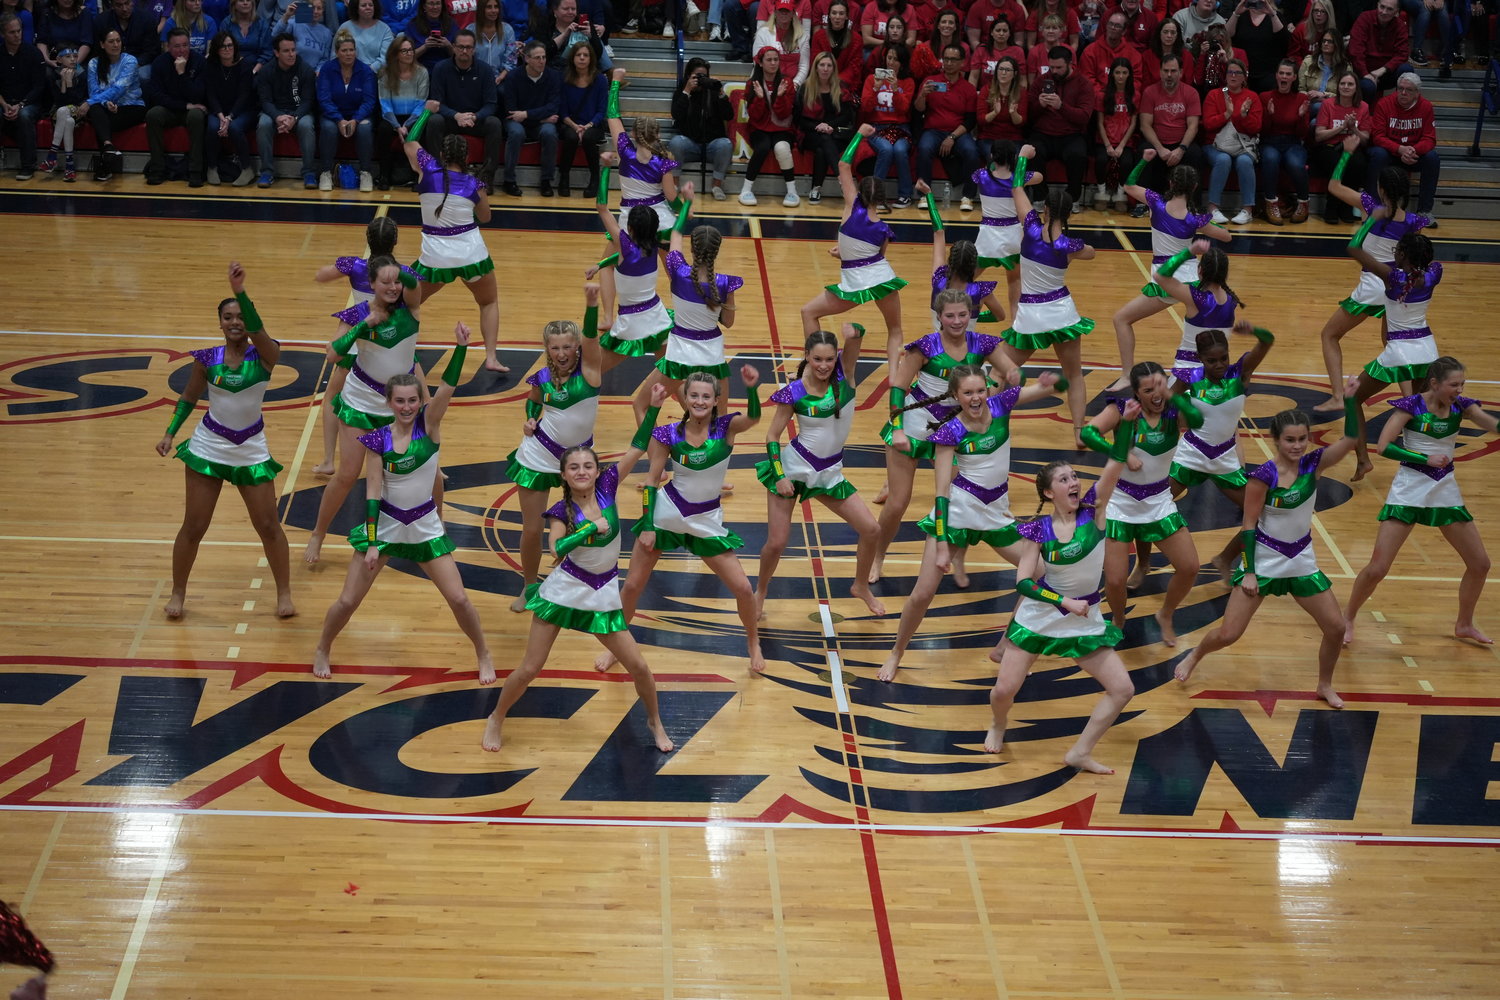 The Red team embraced the ‘Toy Story’ theme with a jazz dance routine inspired by Buzz Lightyear.